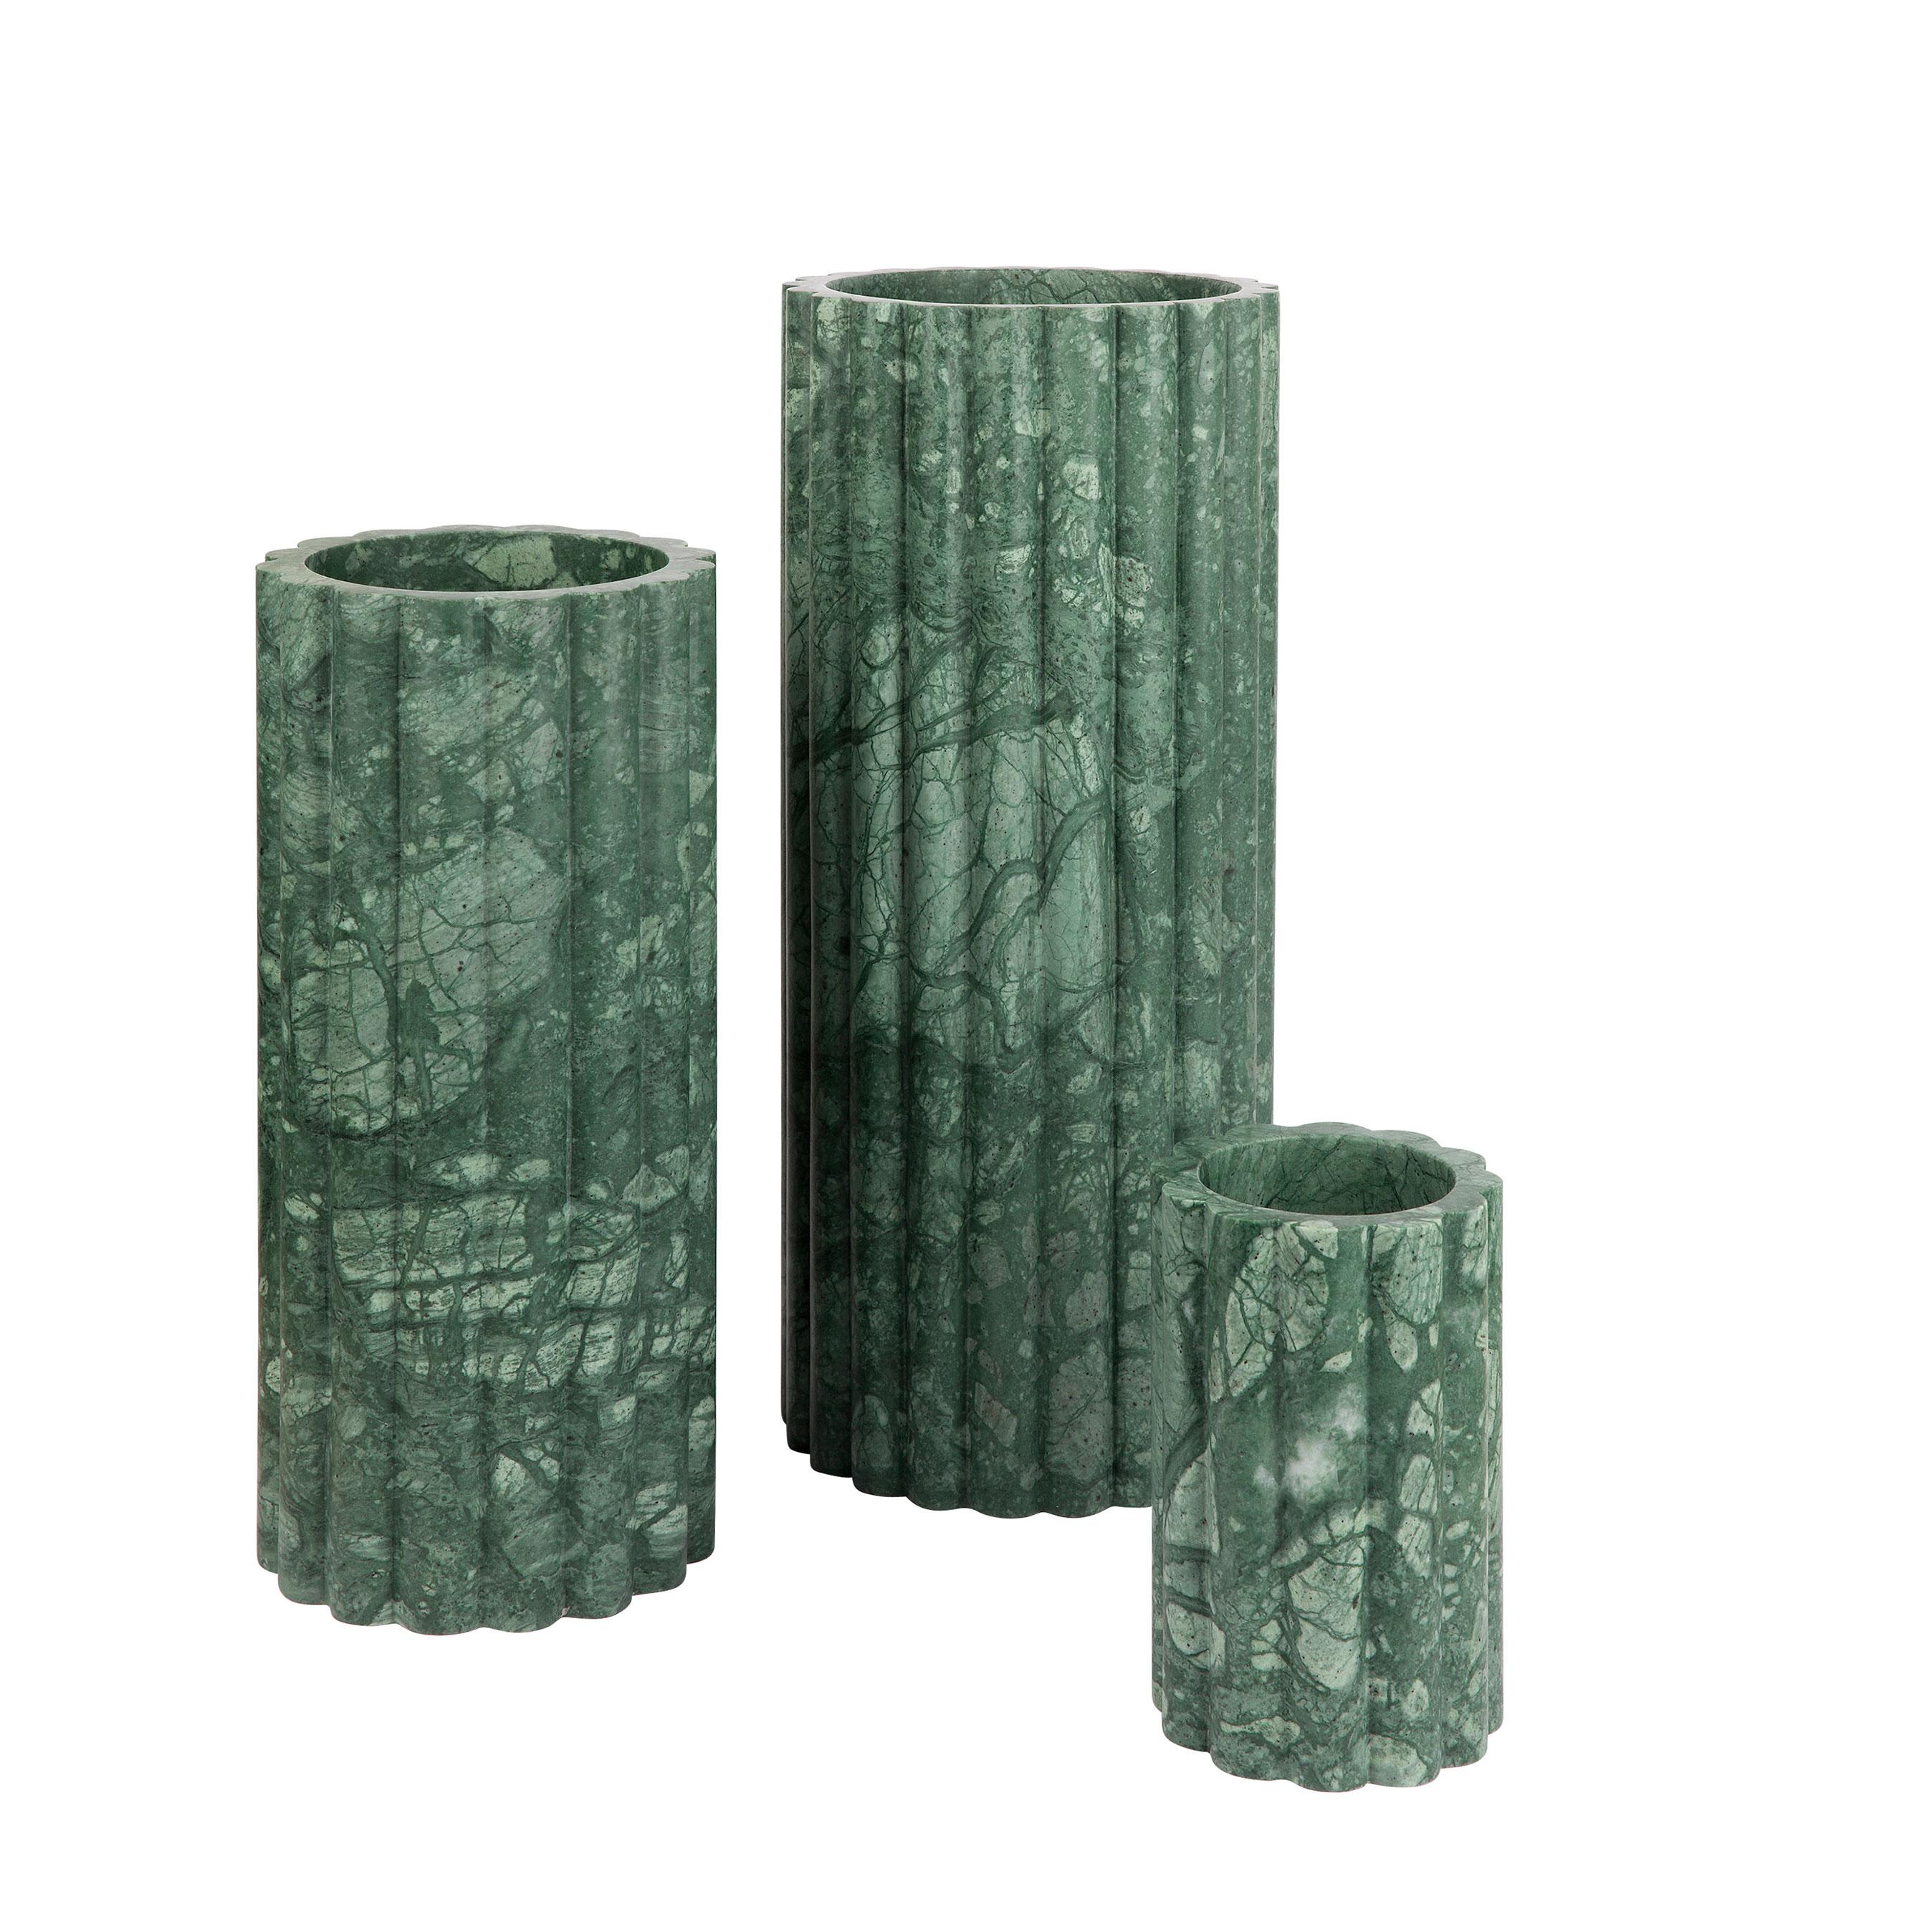 The imposing Vesta collection of vases from Greg Natale draws its inspiration from both the architectural and natural worlds. The power and beauty of the column in Ancient Greek and Roman buildings echoes the delicate yet robust stems and trunks of